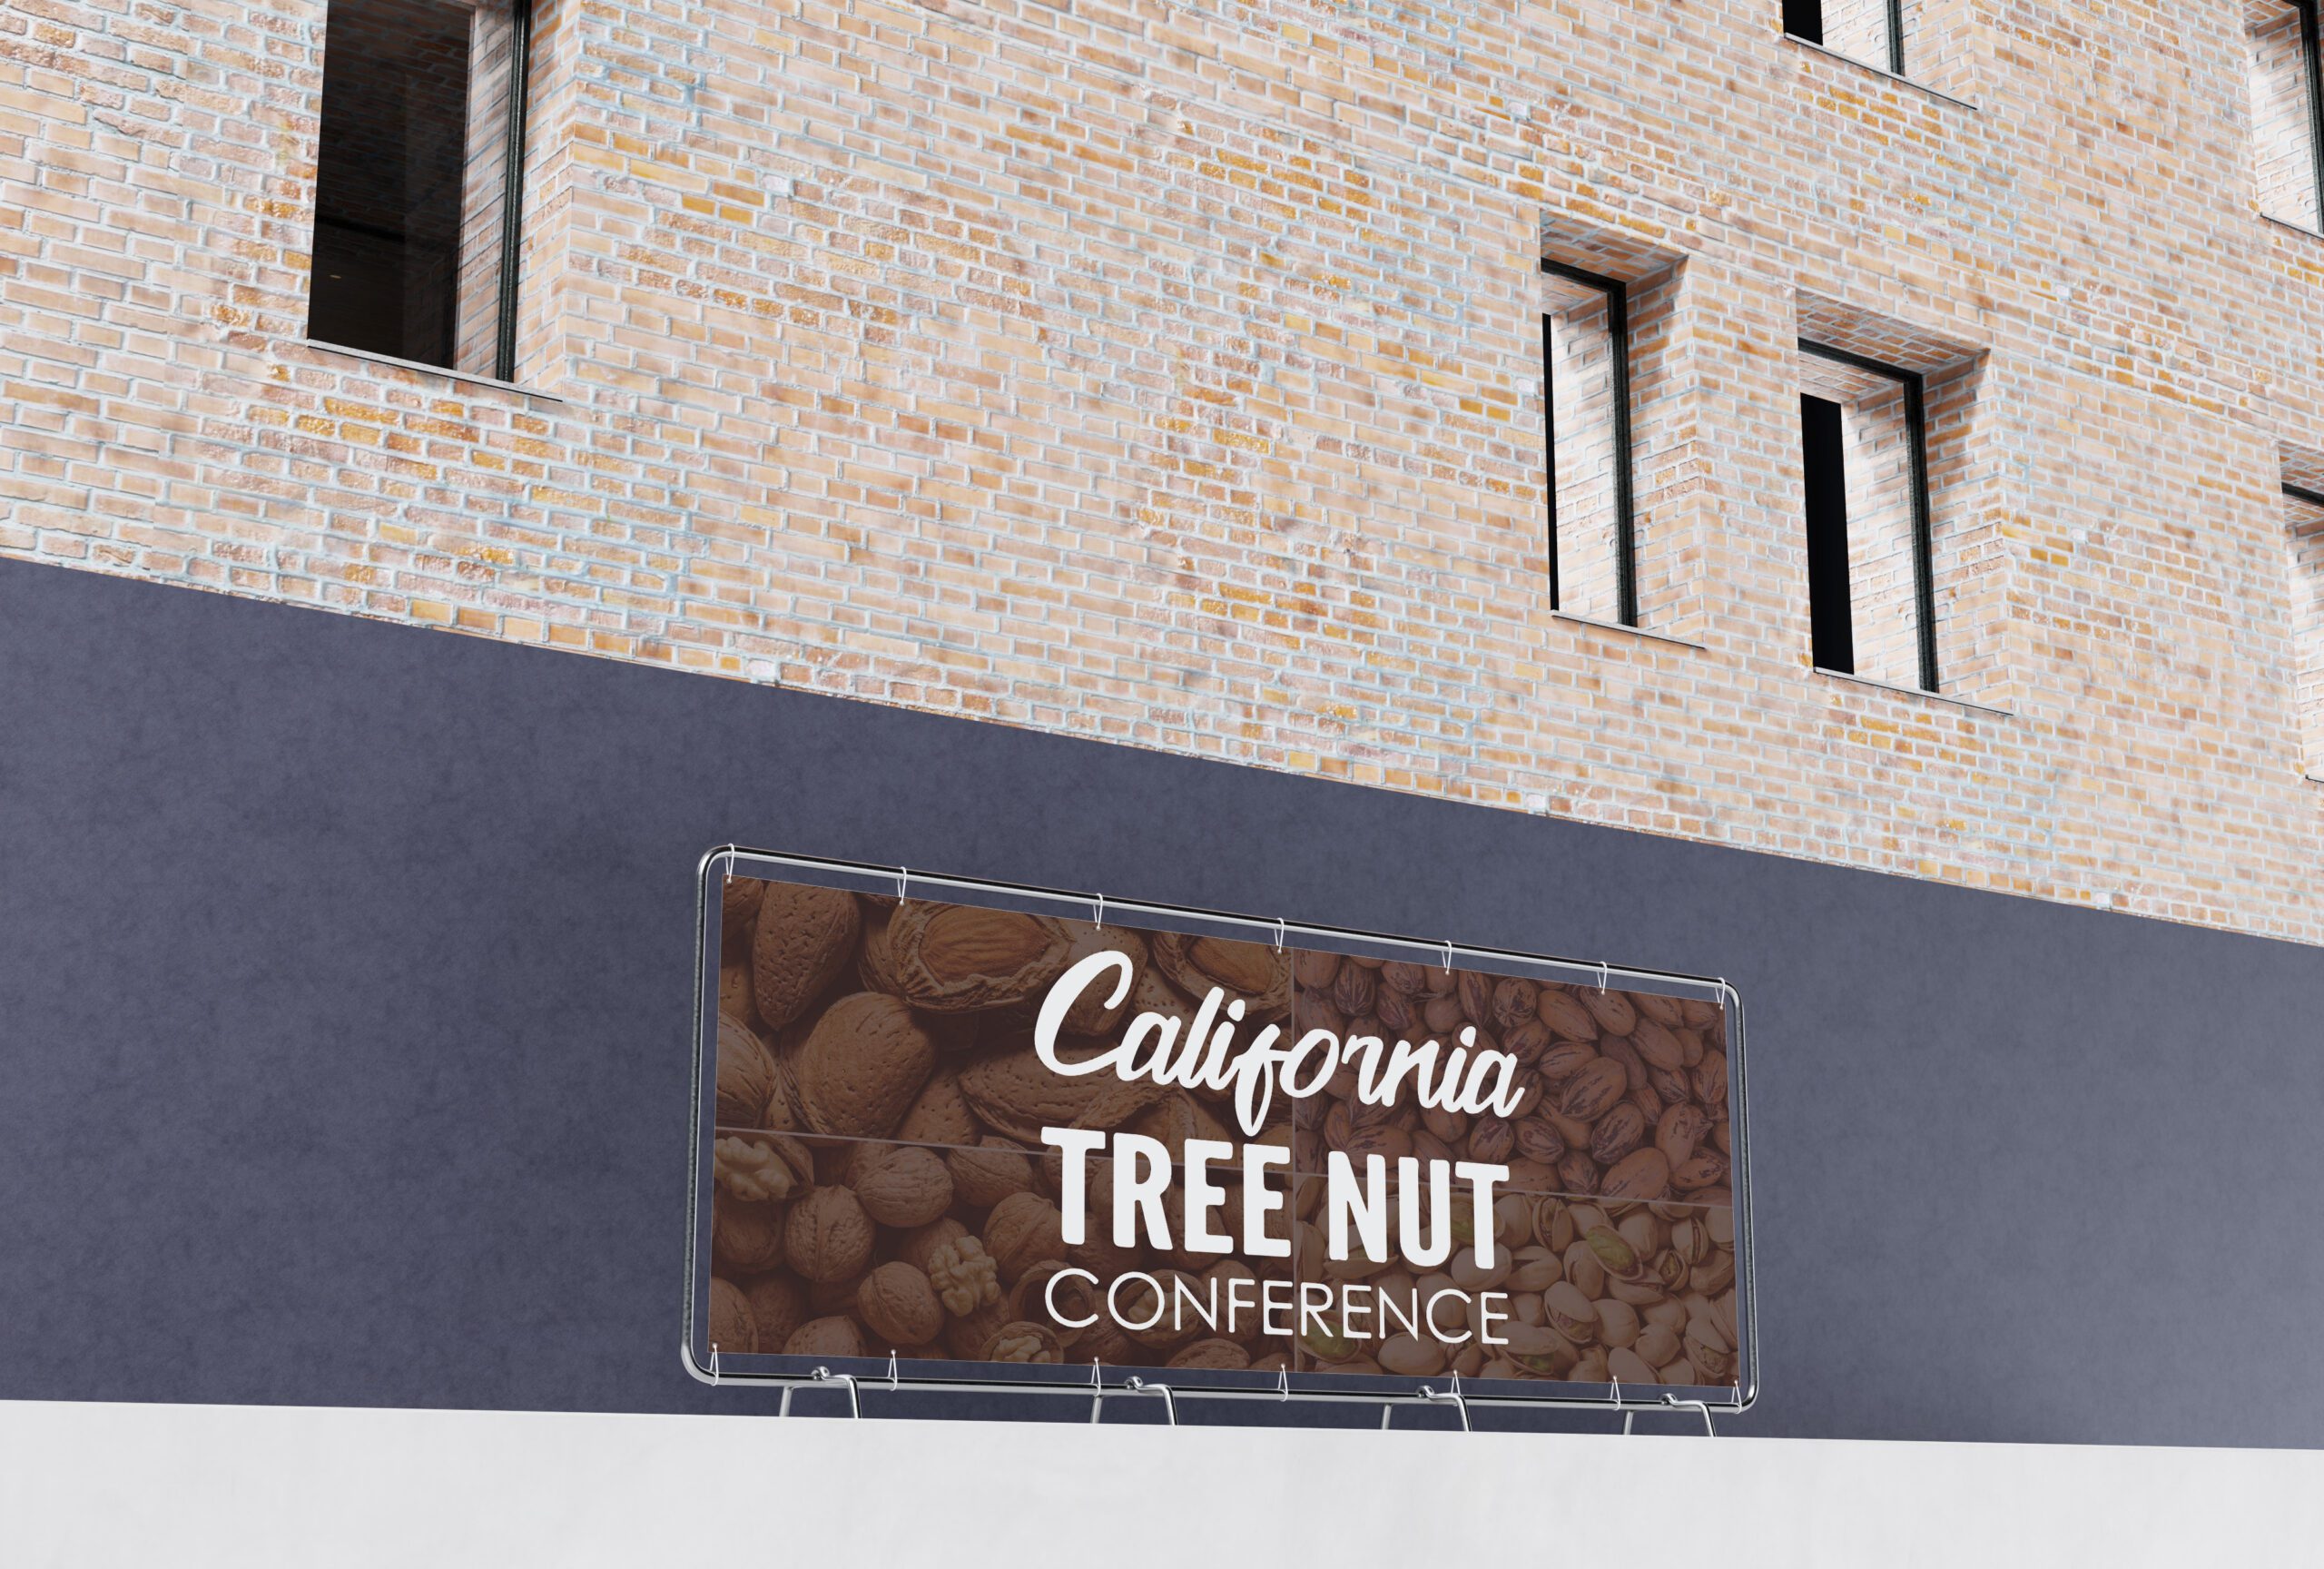 California Tree Nut Conference banner